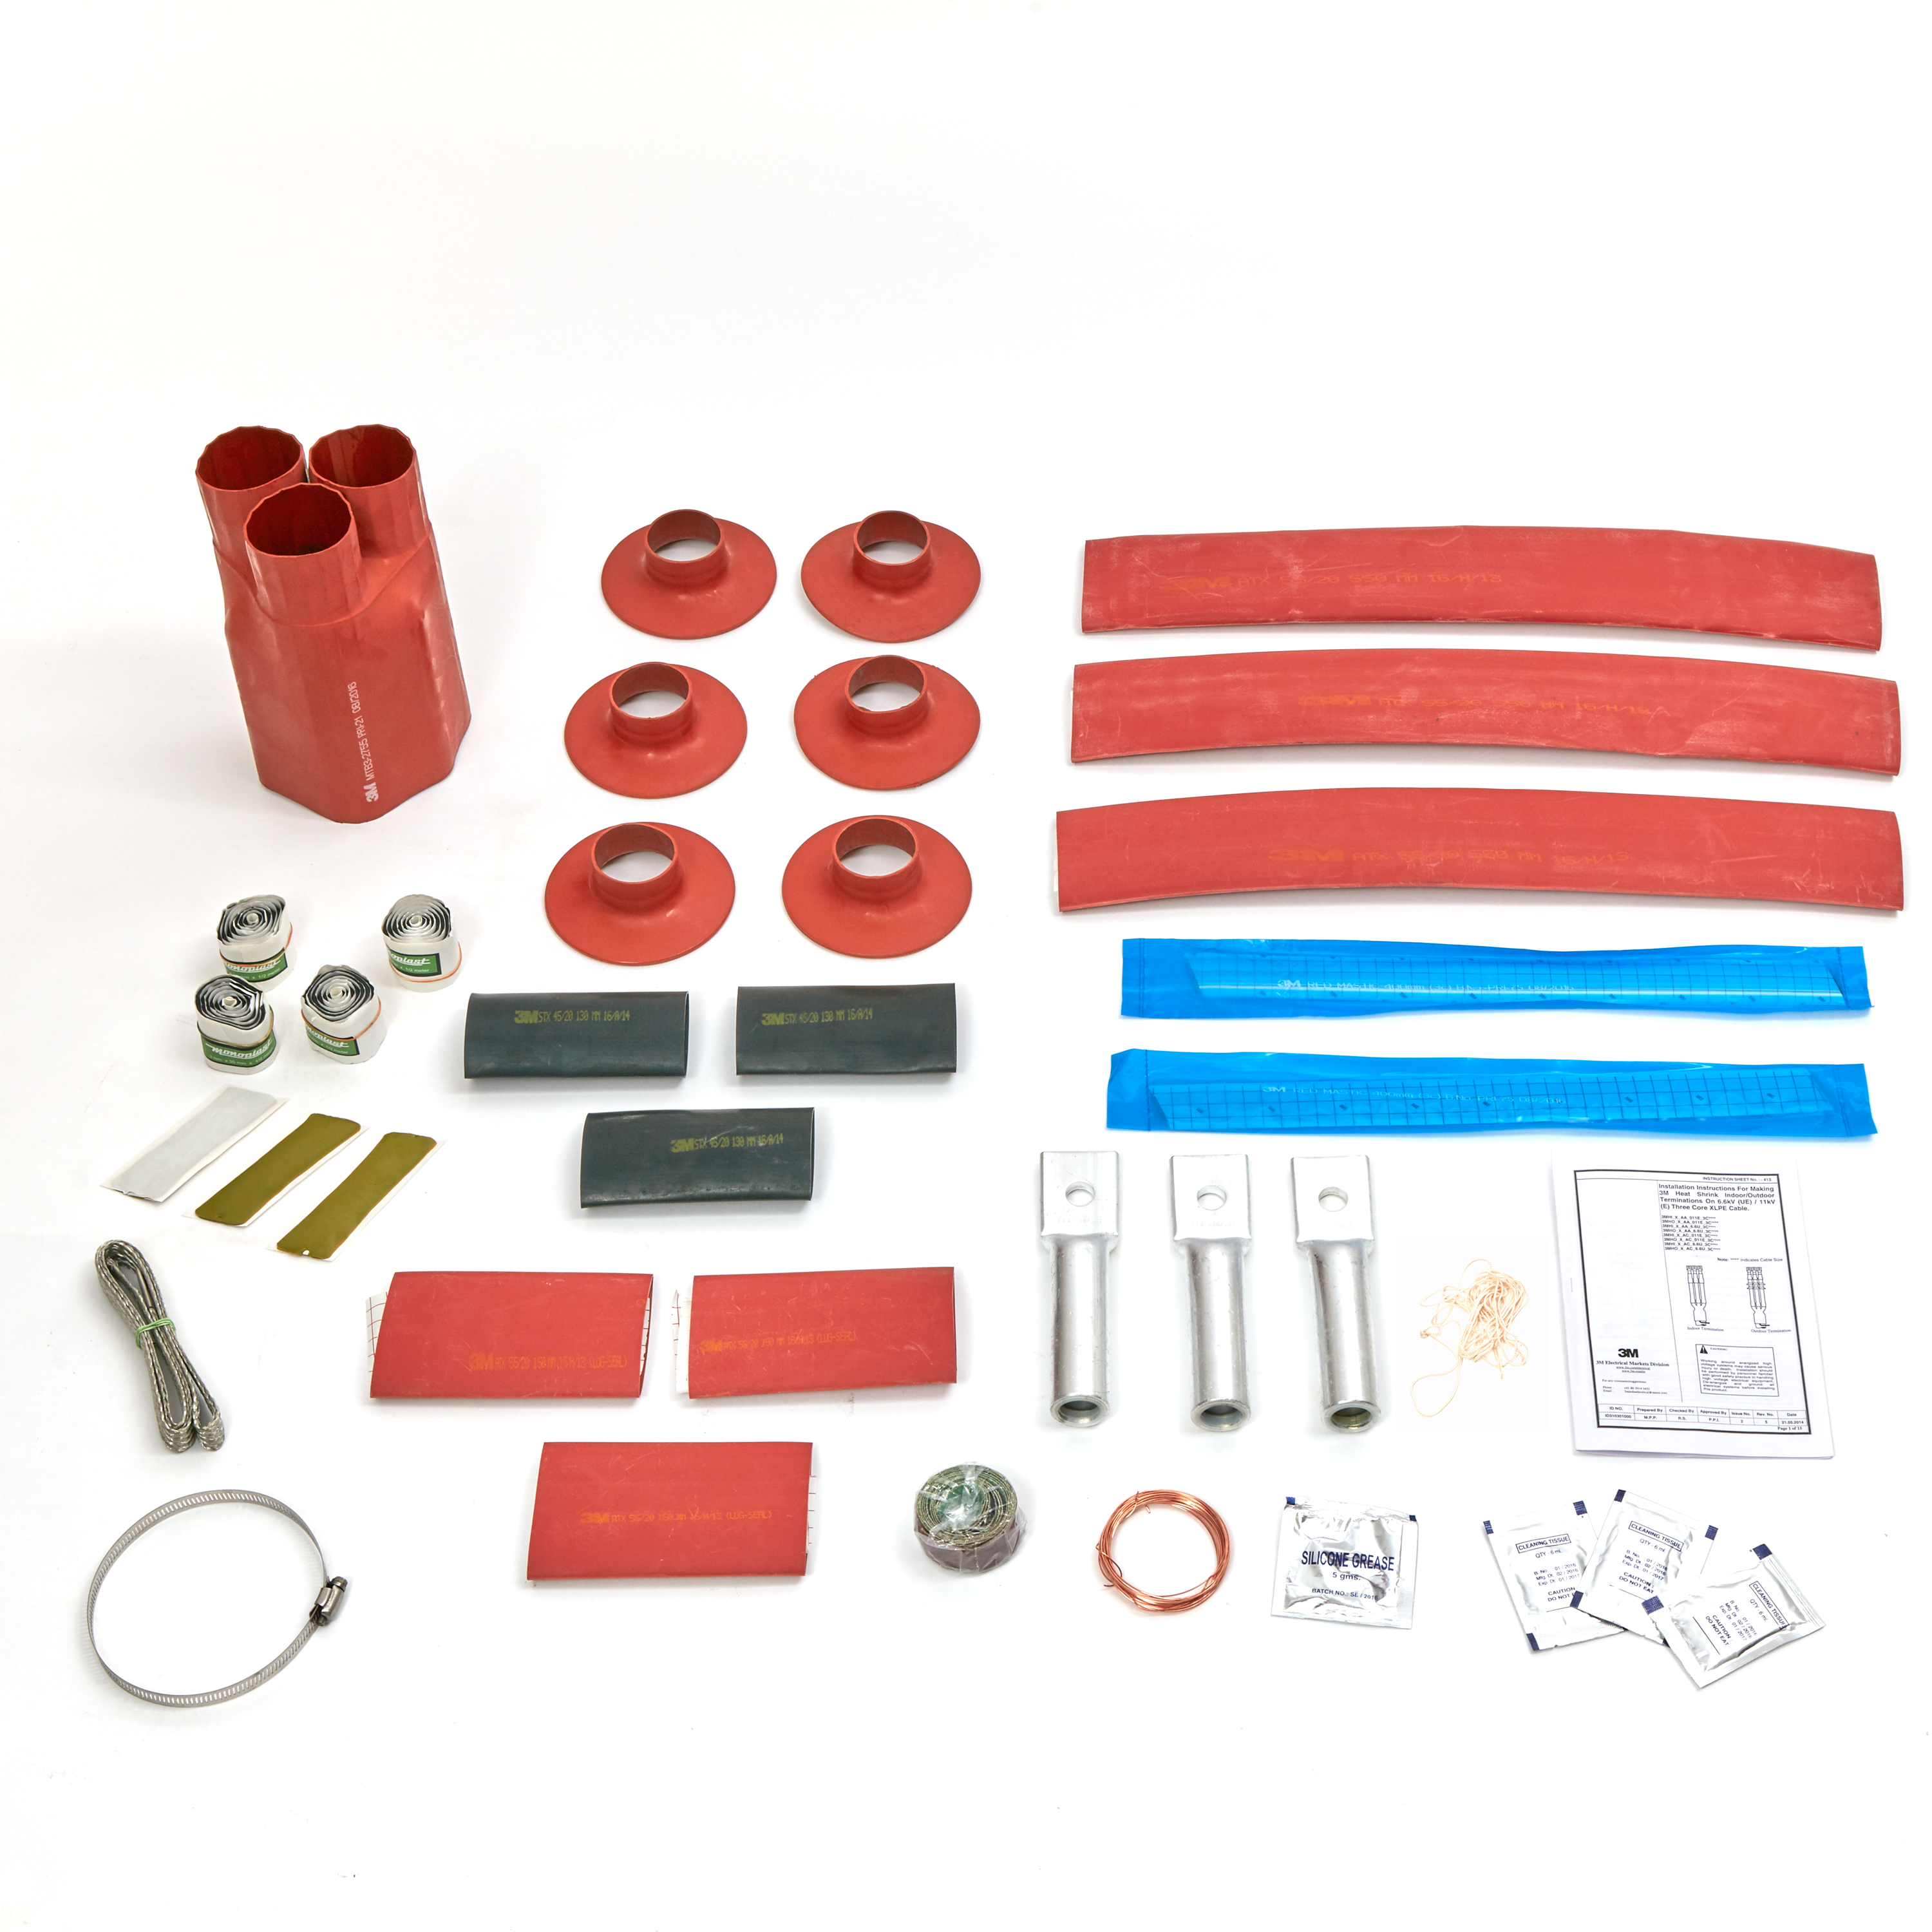 Cable Termination & Jointing Kits